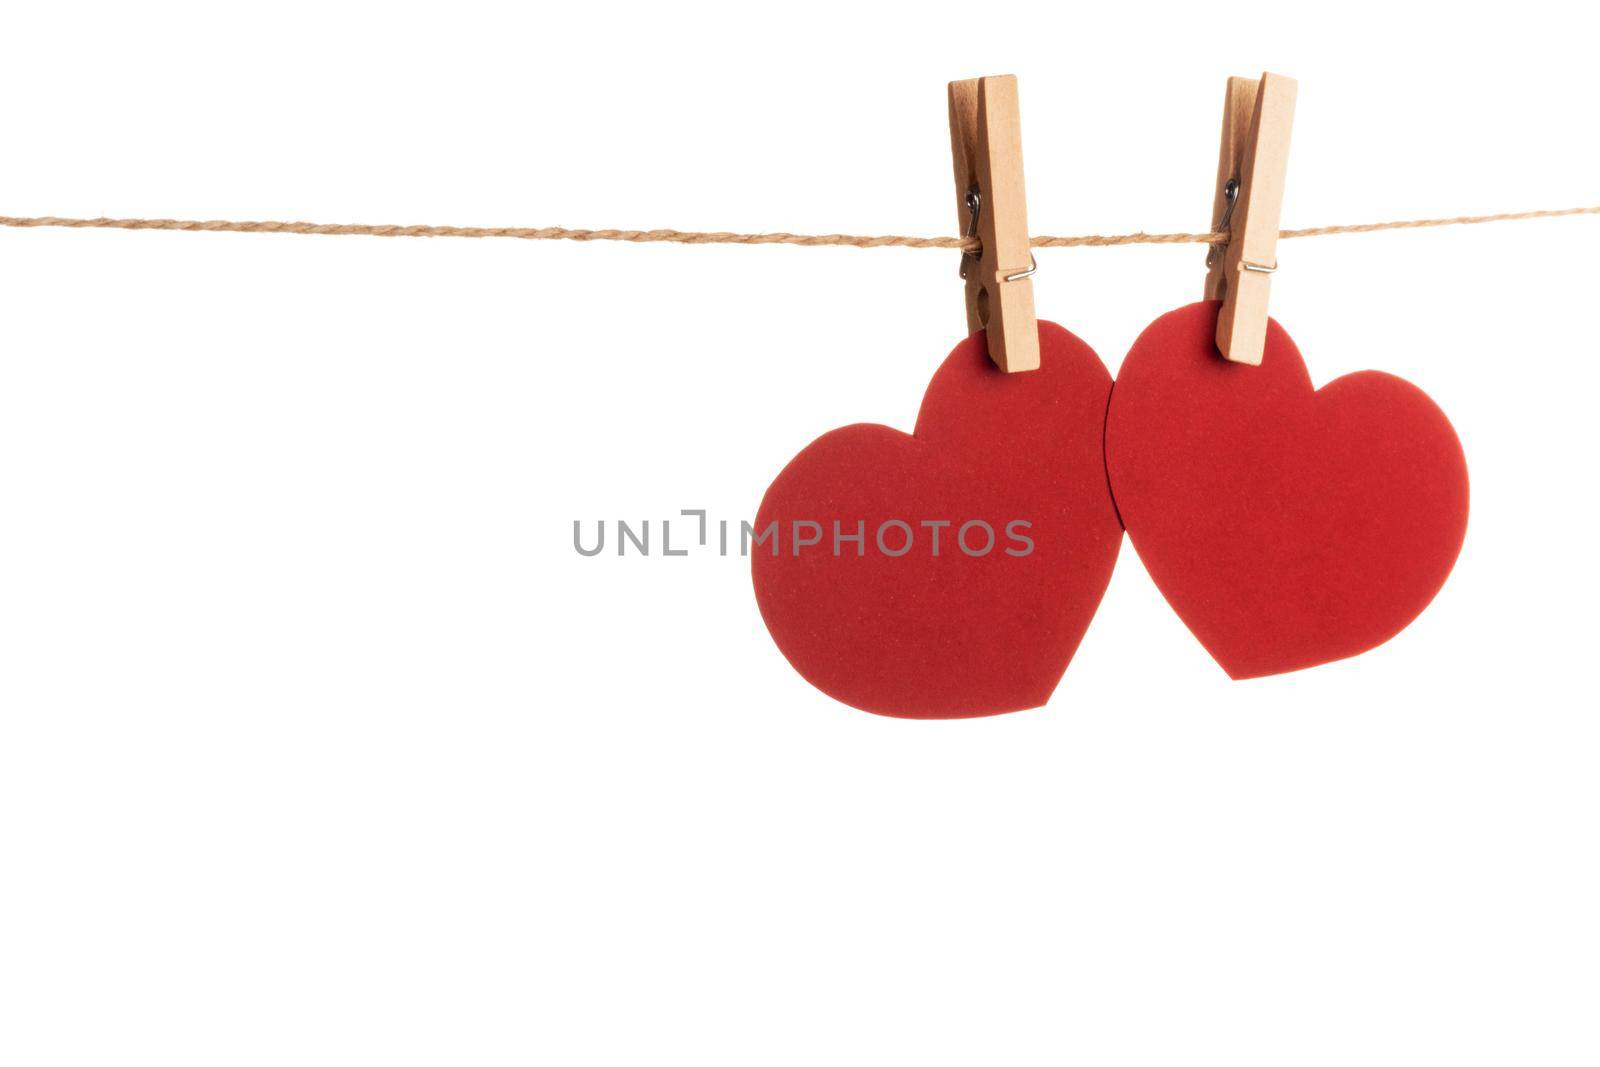 Clothes pegs and two red paper hearts by Yellowj